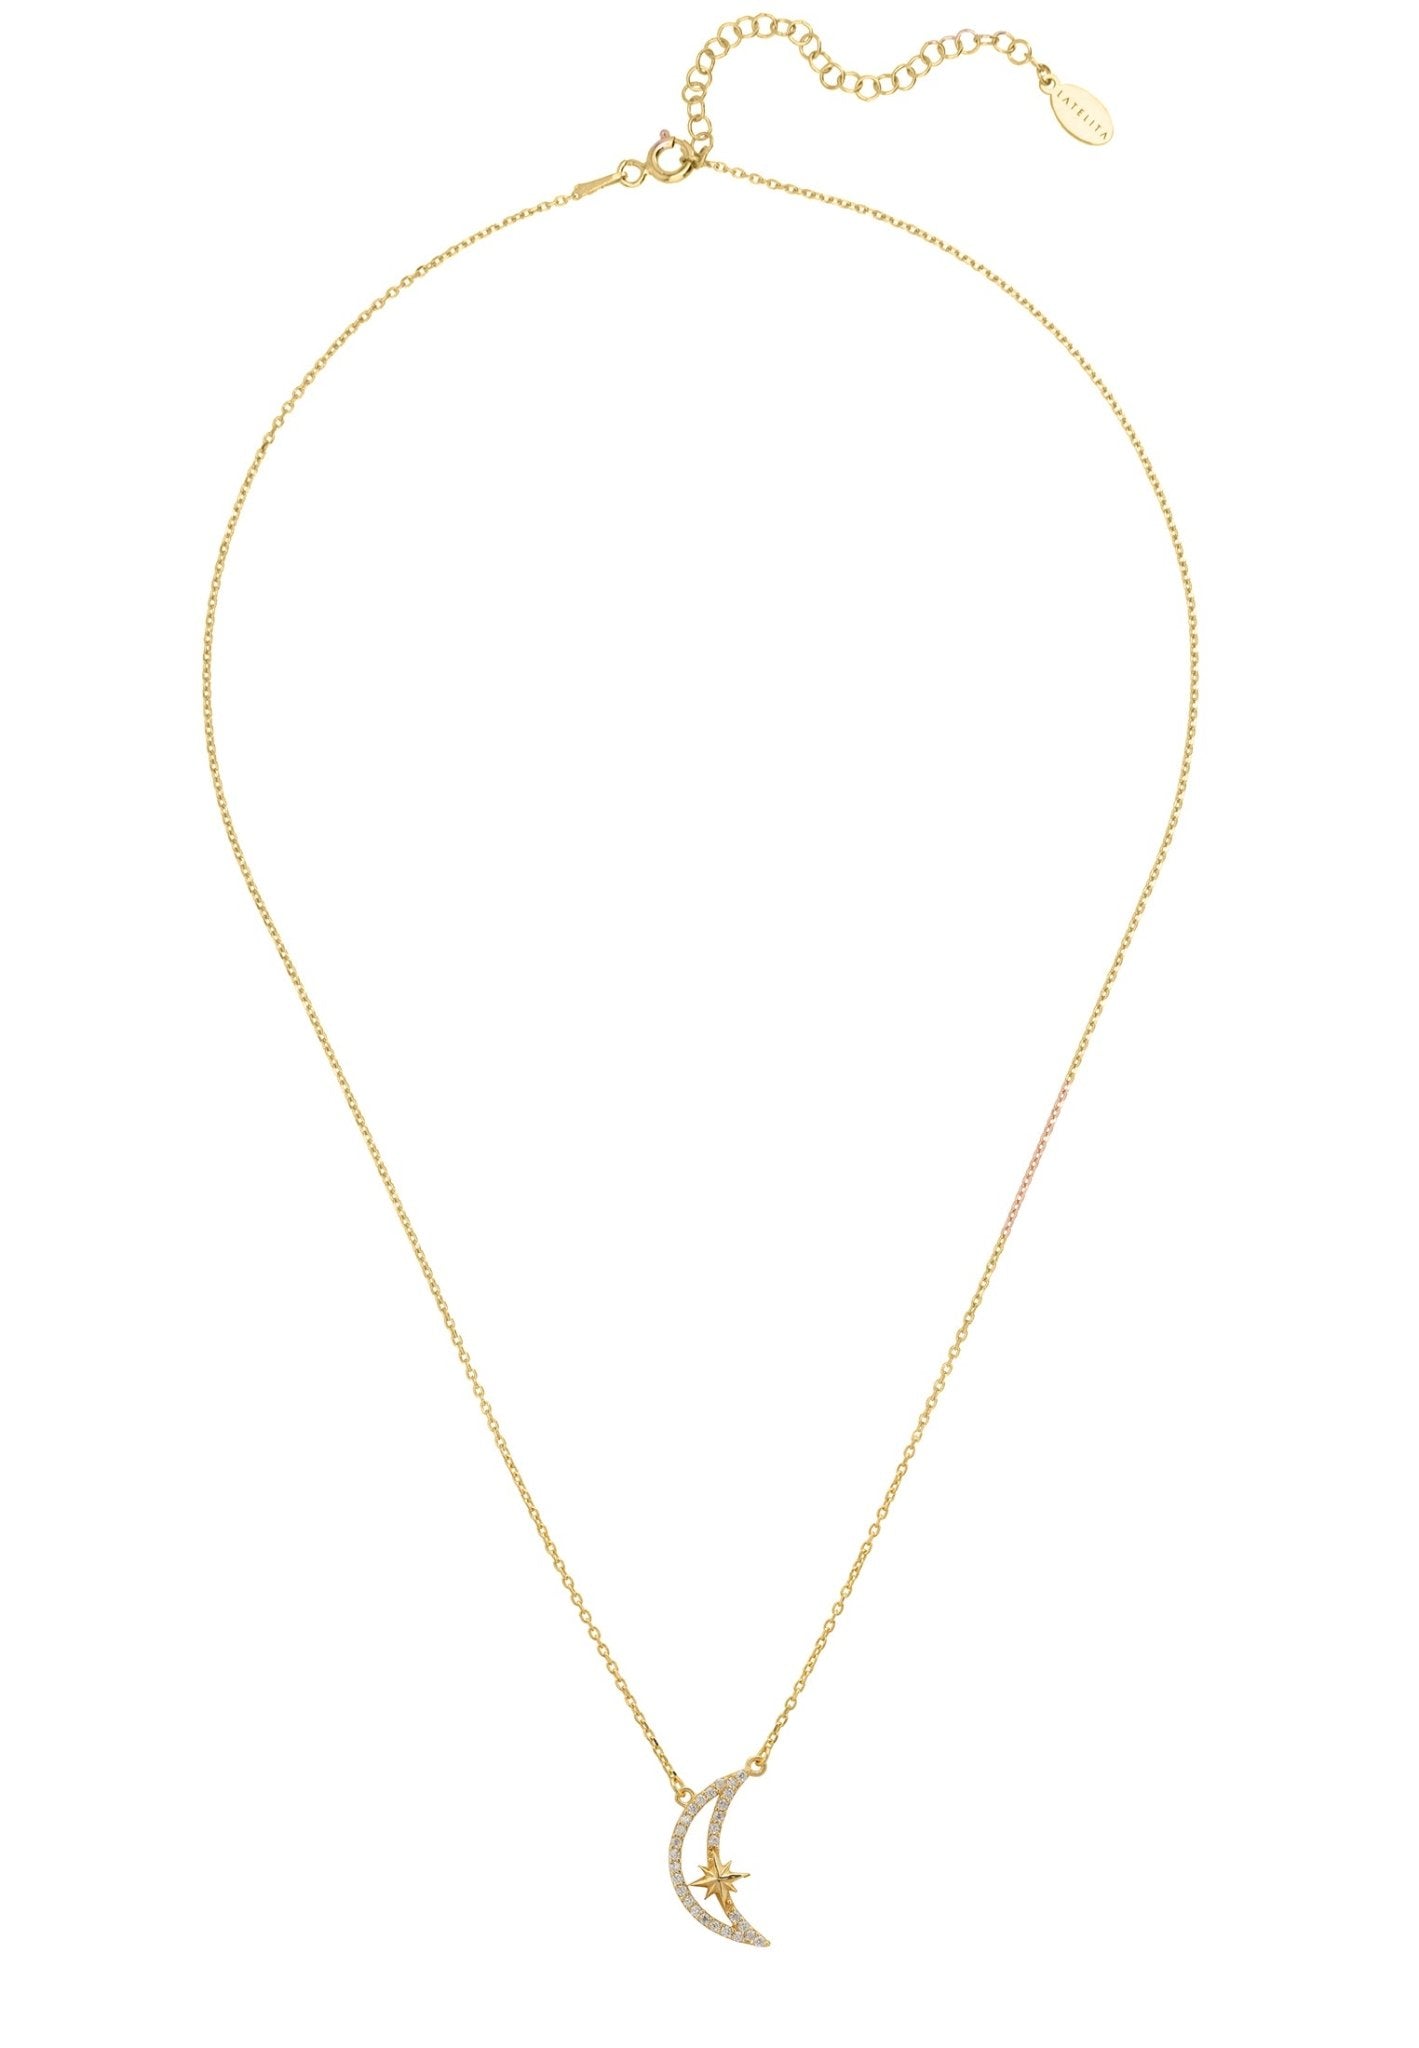 Sparkling Crescent Moon And Star Necklace Gold - LATELITA Necklaces